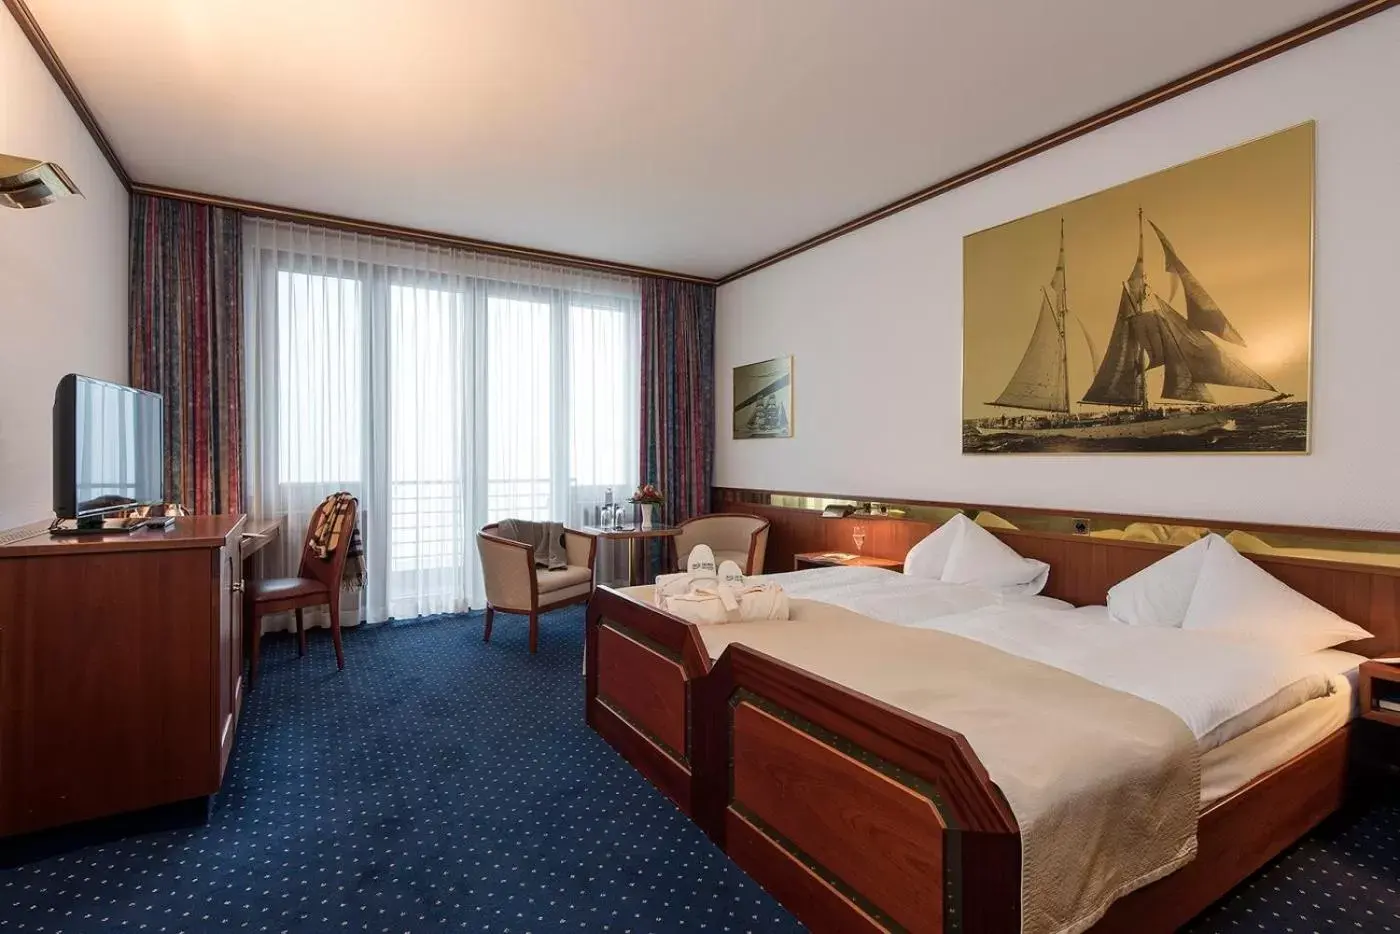 Double Room with Lake View in Bad Horn - Hotel & Spa